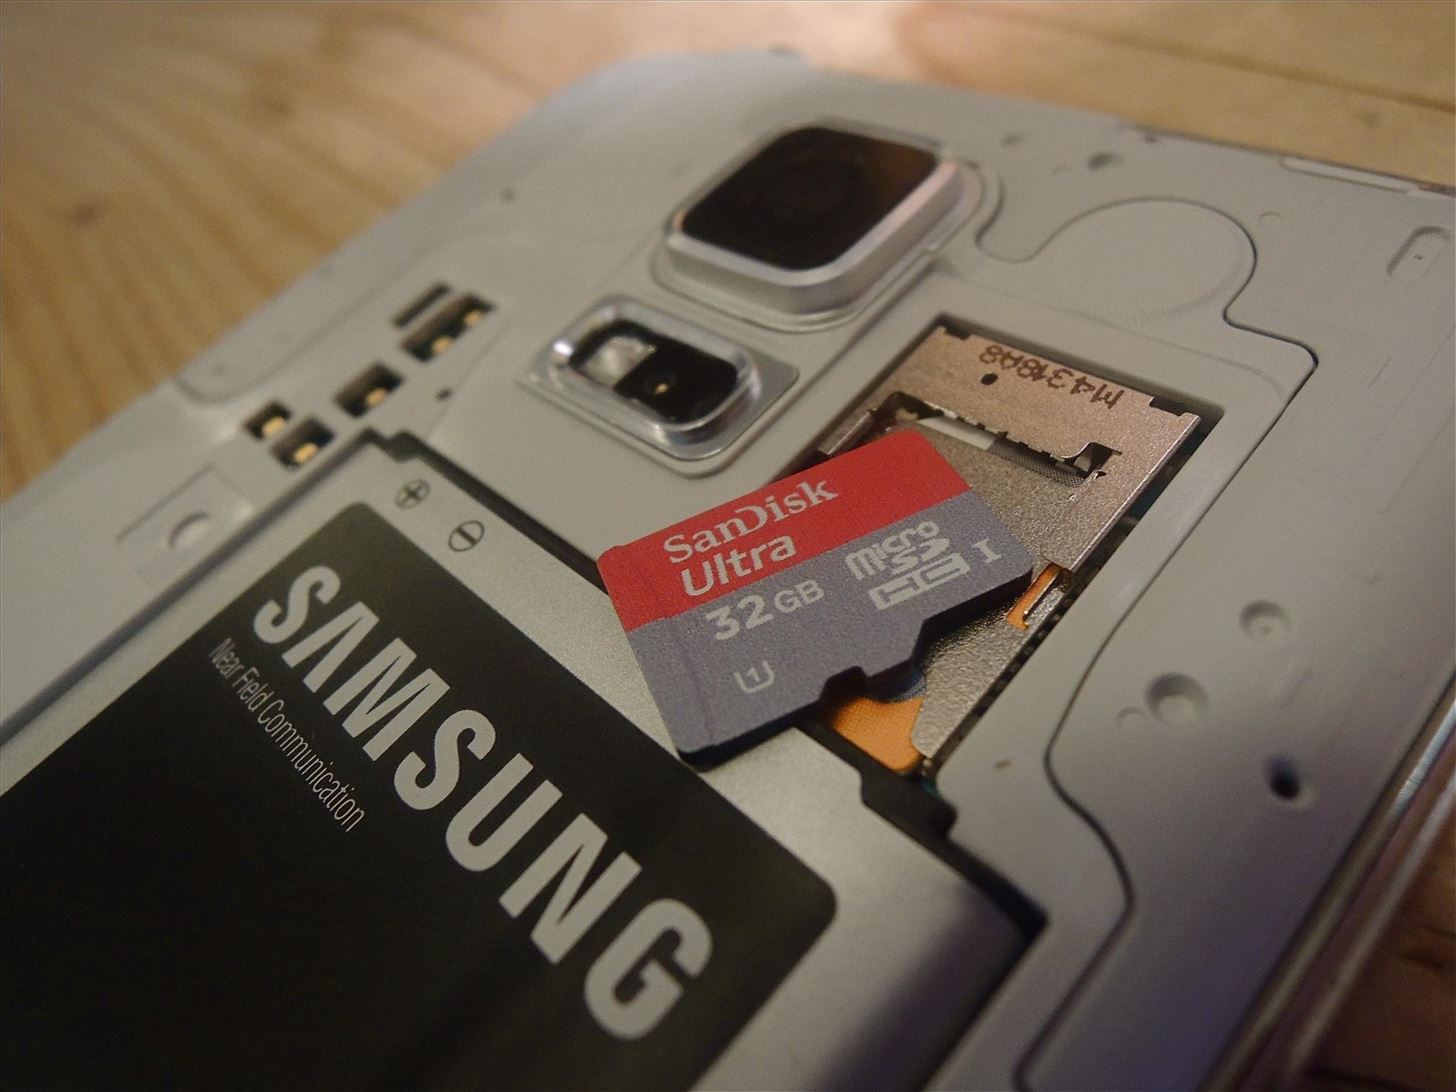 8 Ways to Cool Down & Prevent Your Samsung Galaxy S5 from Overheating